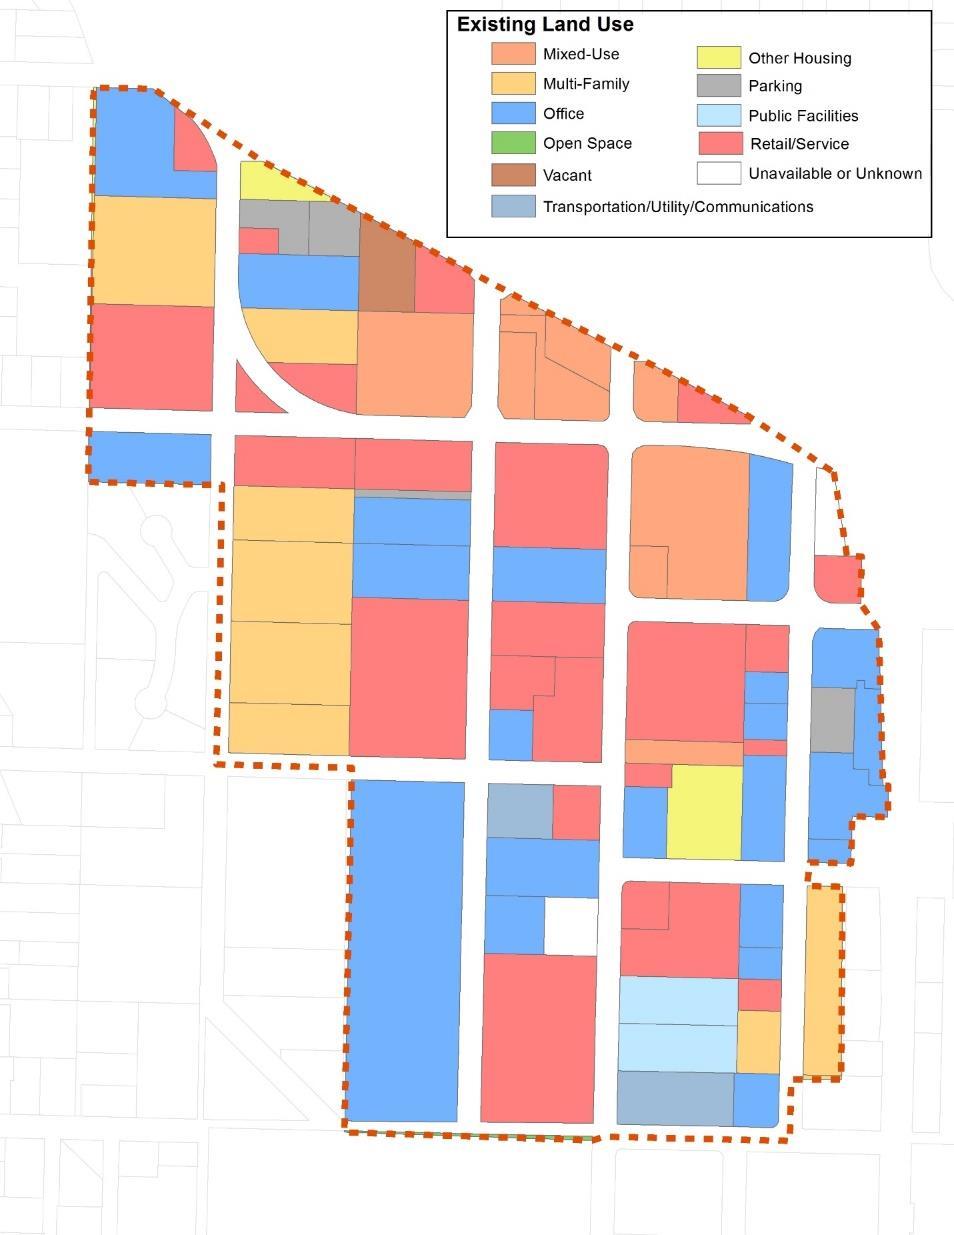 Land Use Land Use has implications for parking supply and demand Parking requirements, permitting, and other restrictions tied to land use and zoning Most of Town Center is devoted to